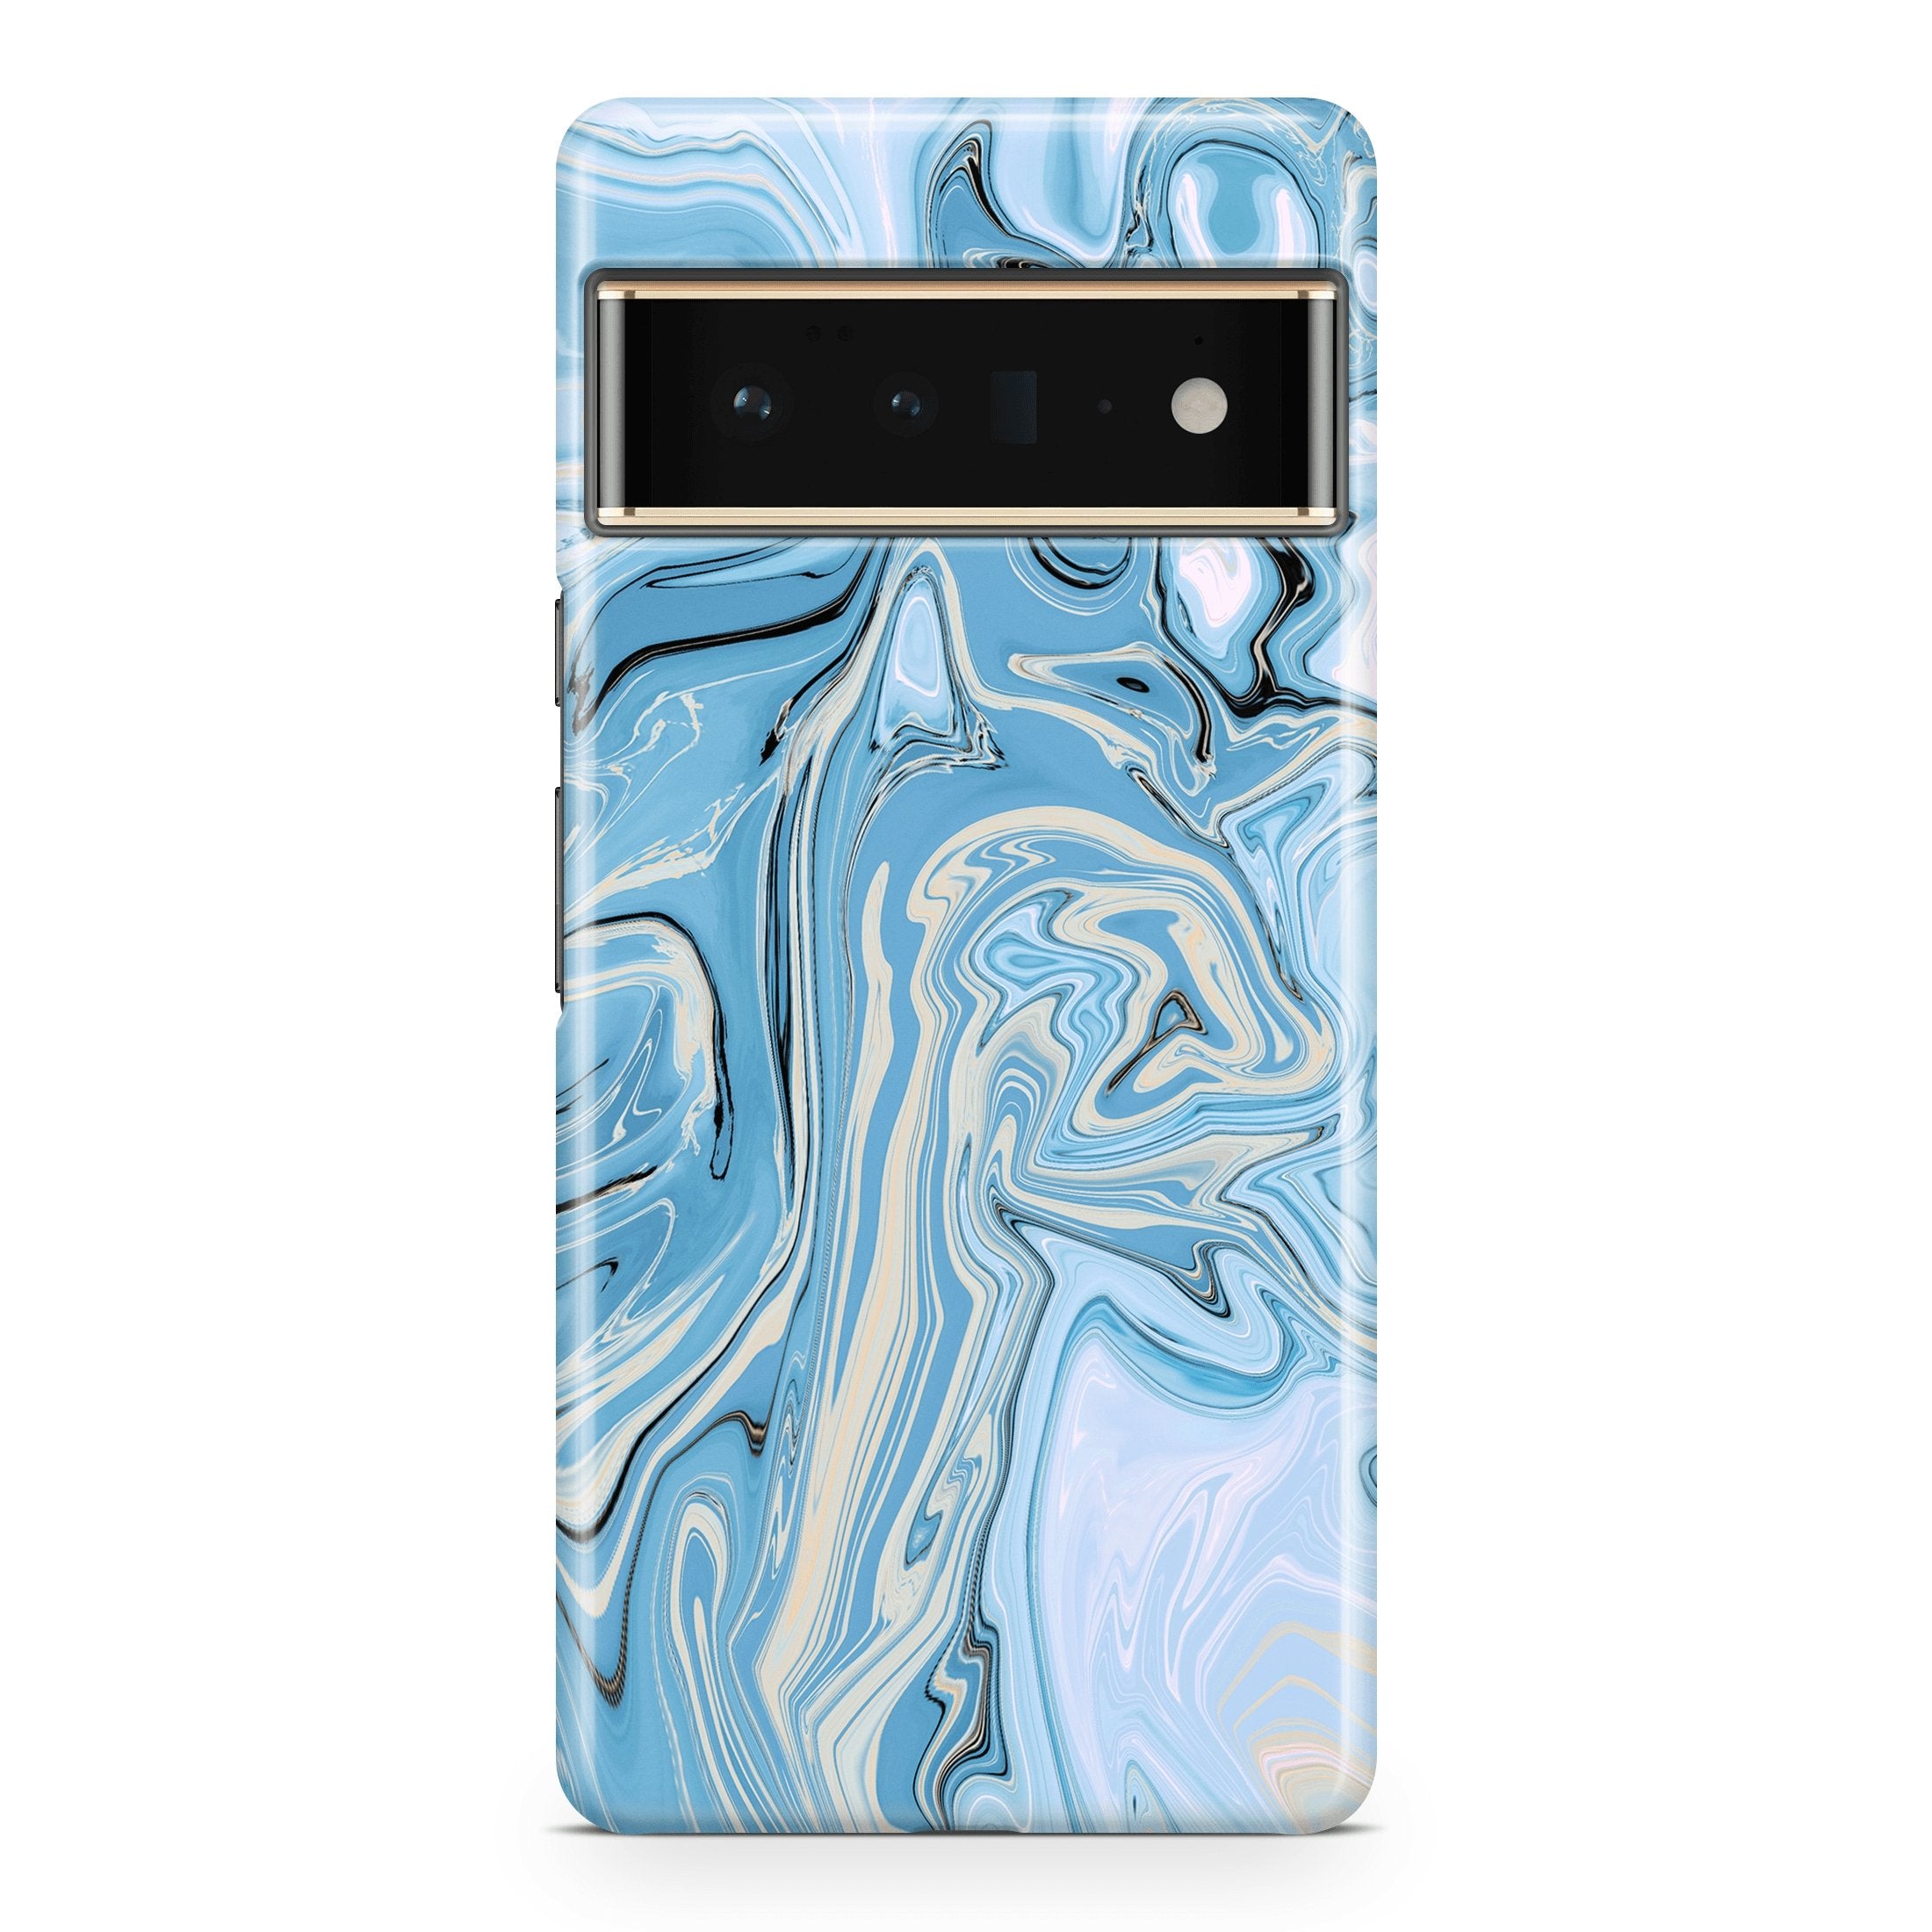 Blue & Creme Agate - Google phone case designs by CaseSwagger